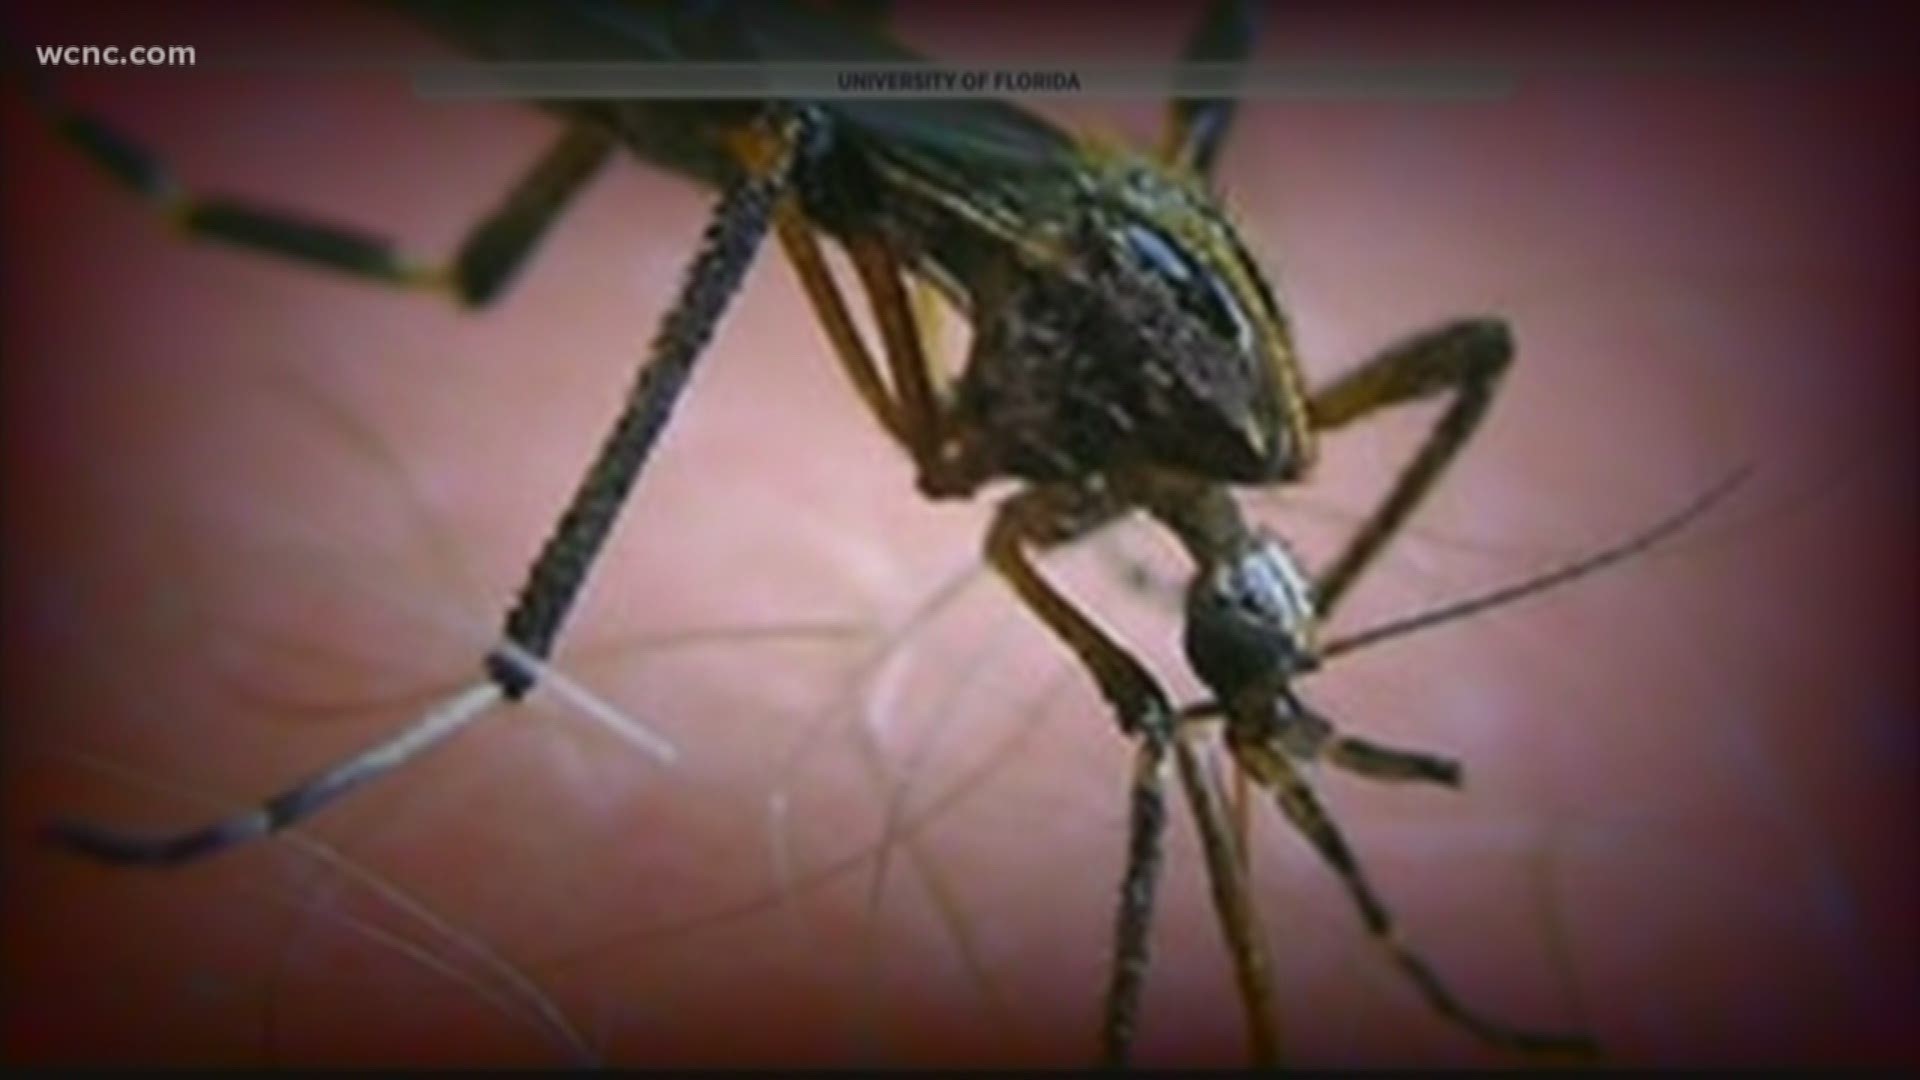 Experts are calling it a "mosquito-pocalypse" in the aftermath of Hurricane Florence.